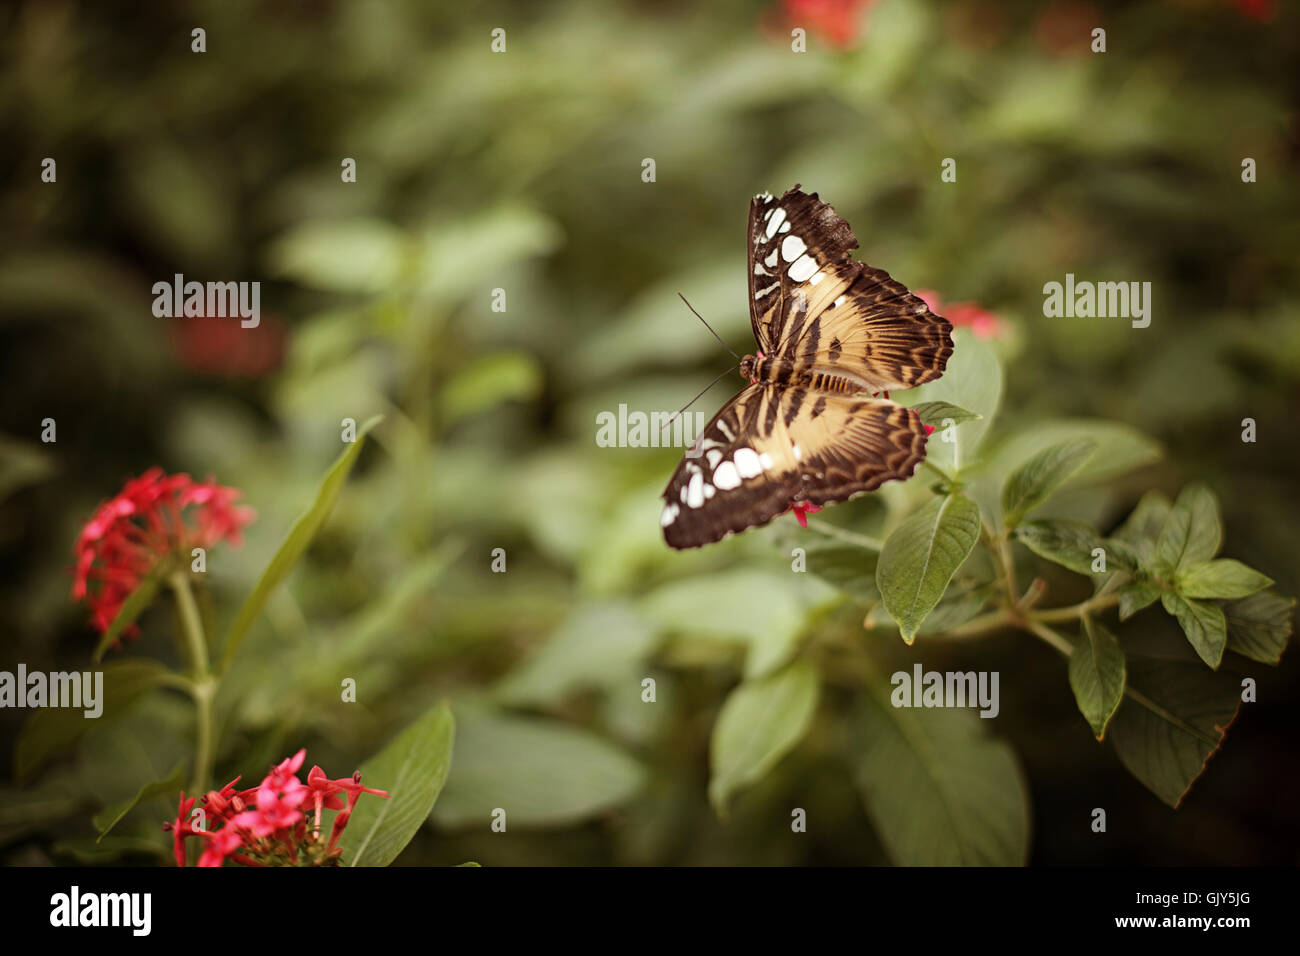 A beautiful butterfly that has just landed on a plant with pink flower blossoms. Stock Photo